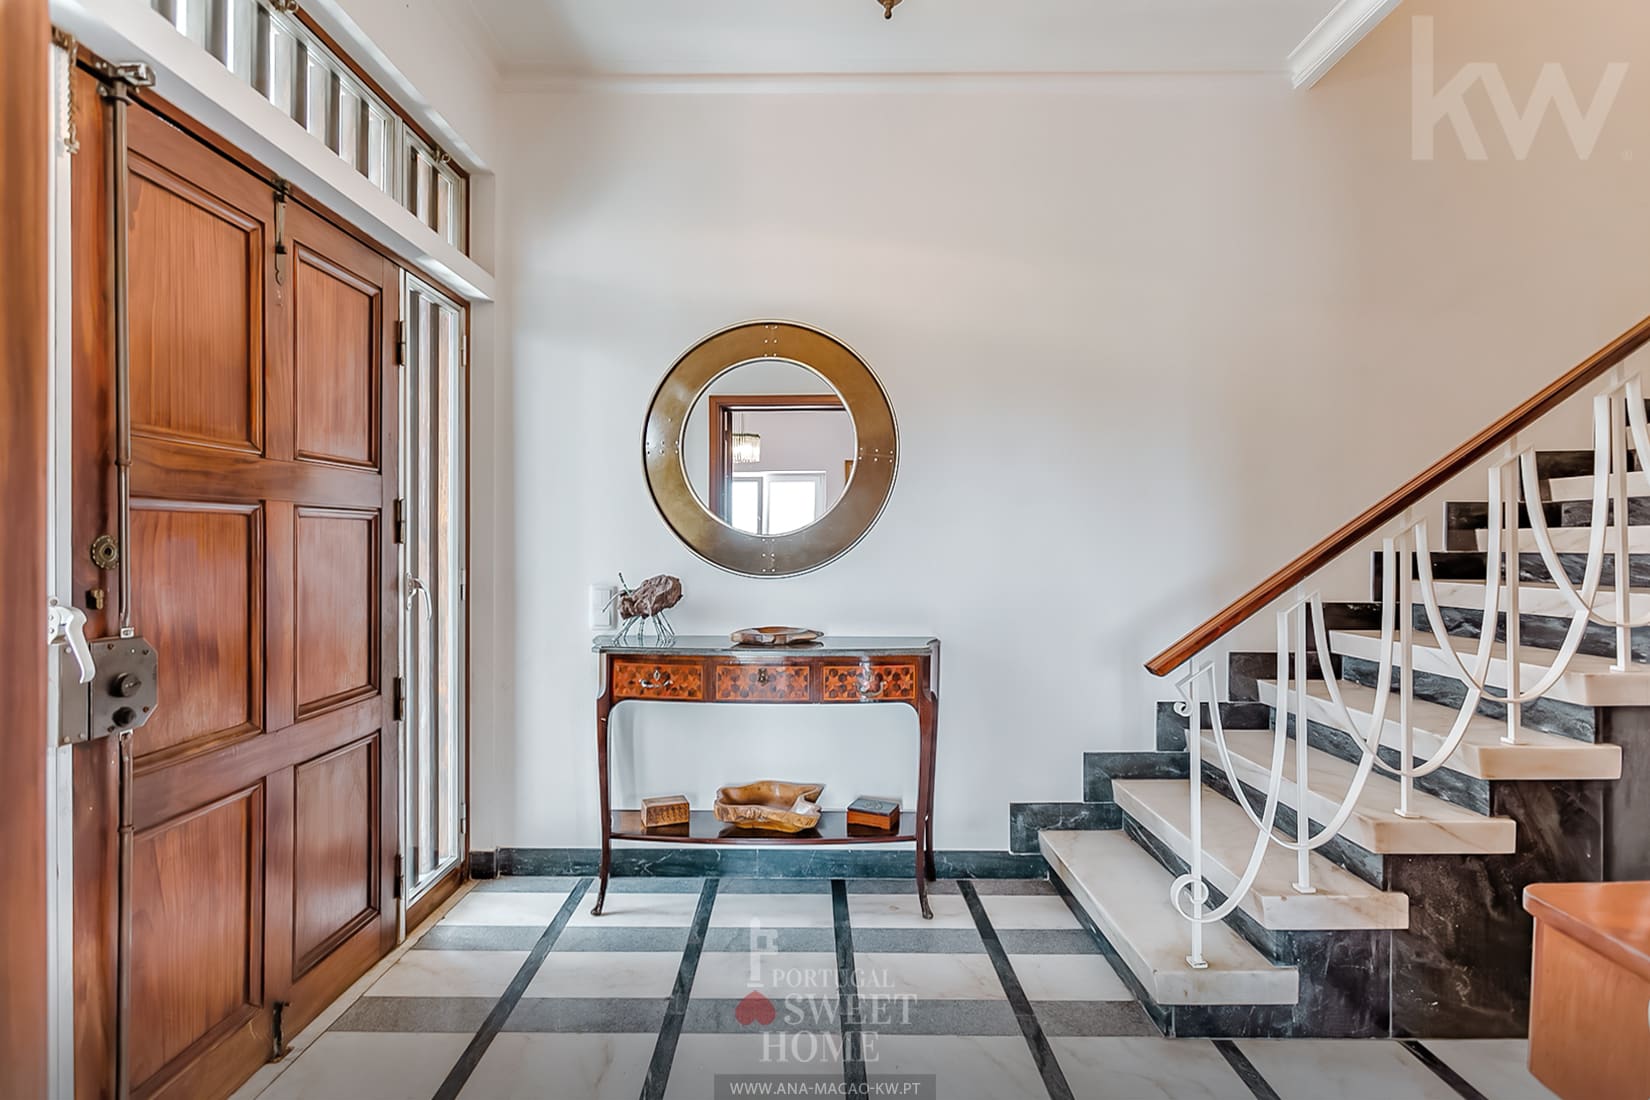 Entrance hall (6.35 m²) with marble floor